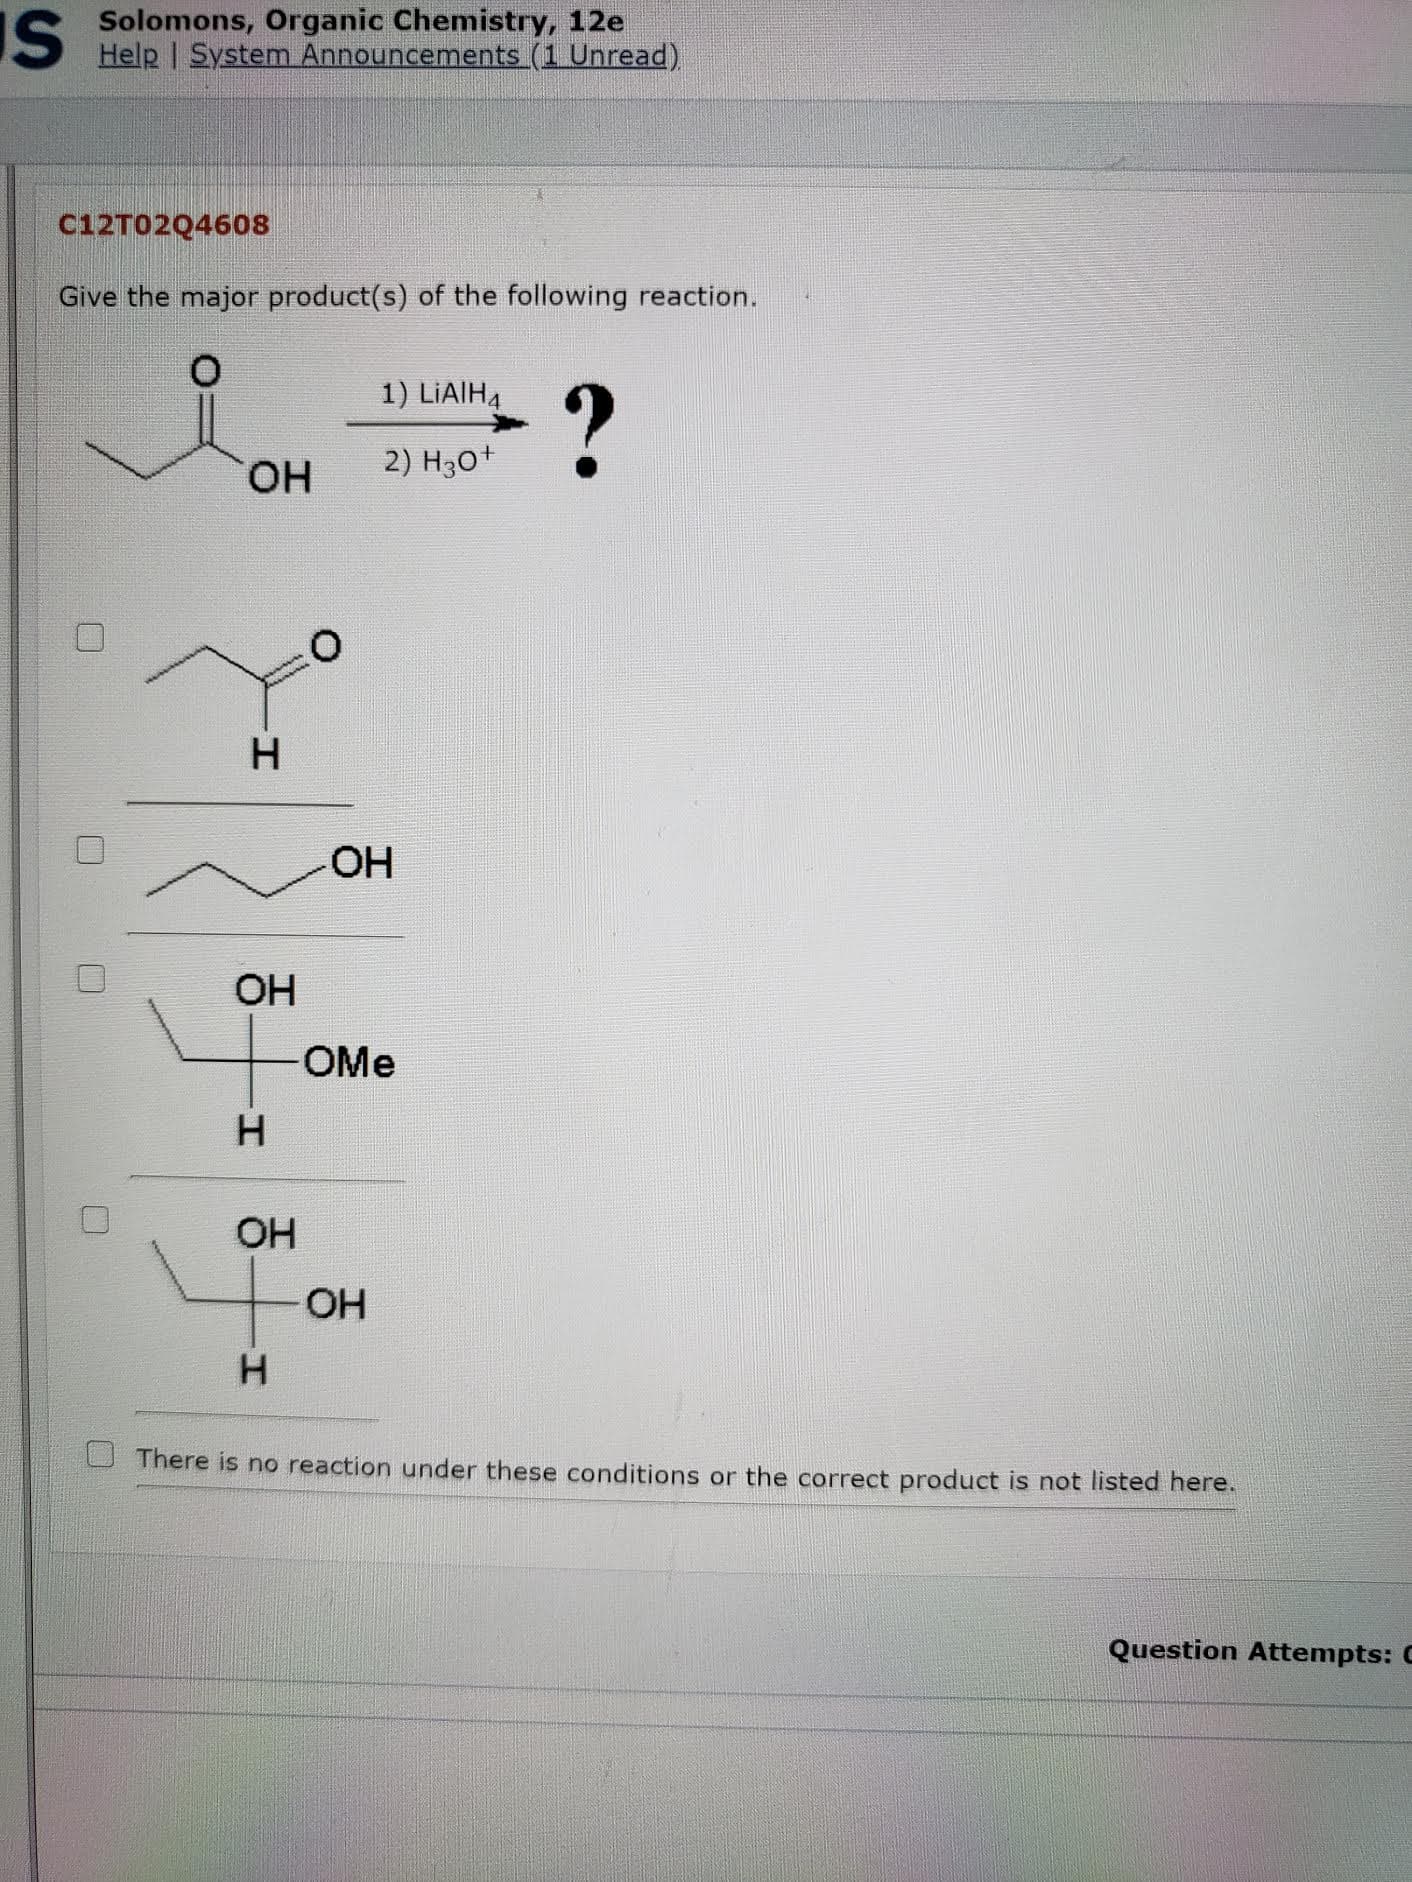 Give the major product(s) of the following reaction.
1) LİAIH,
HO.
2) H30+
